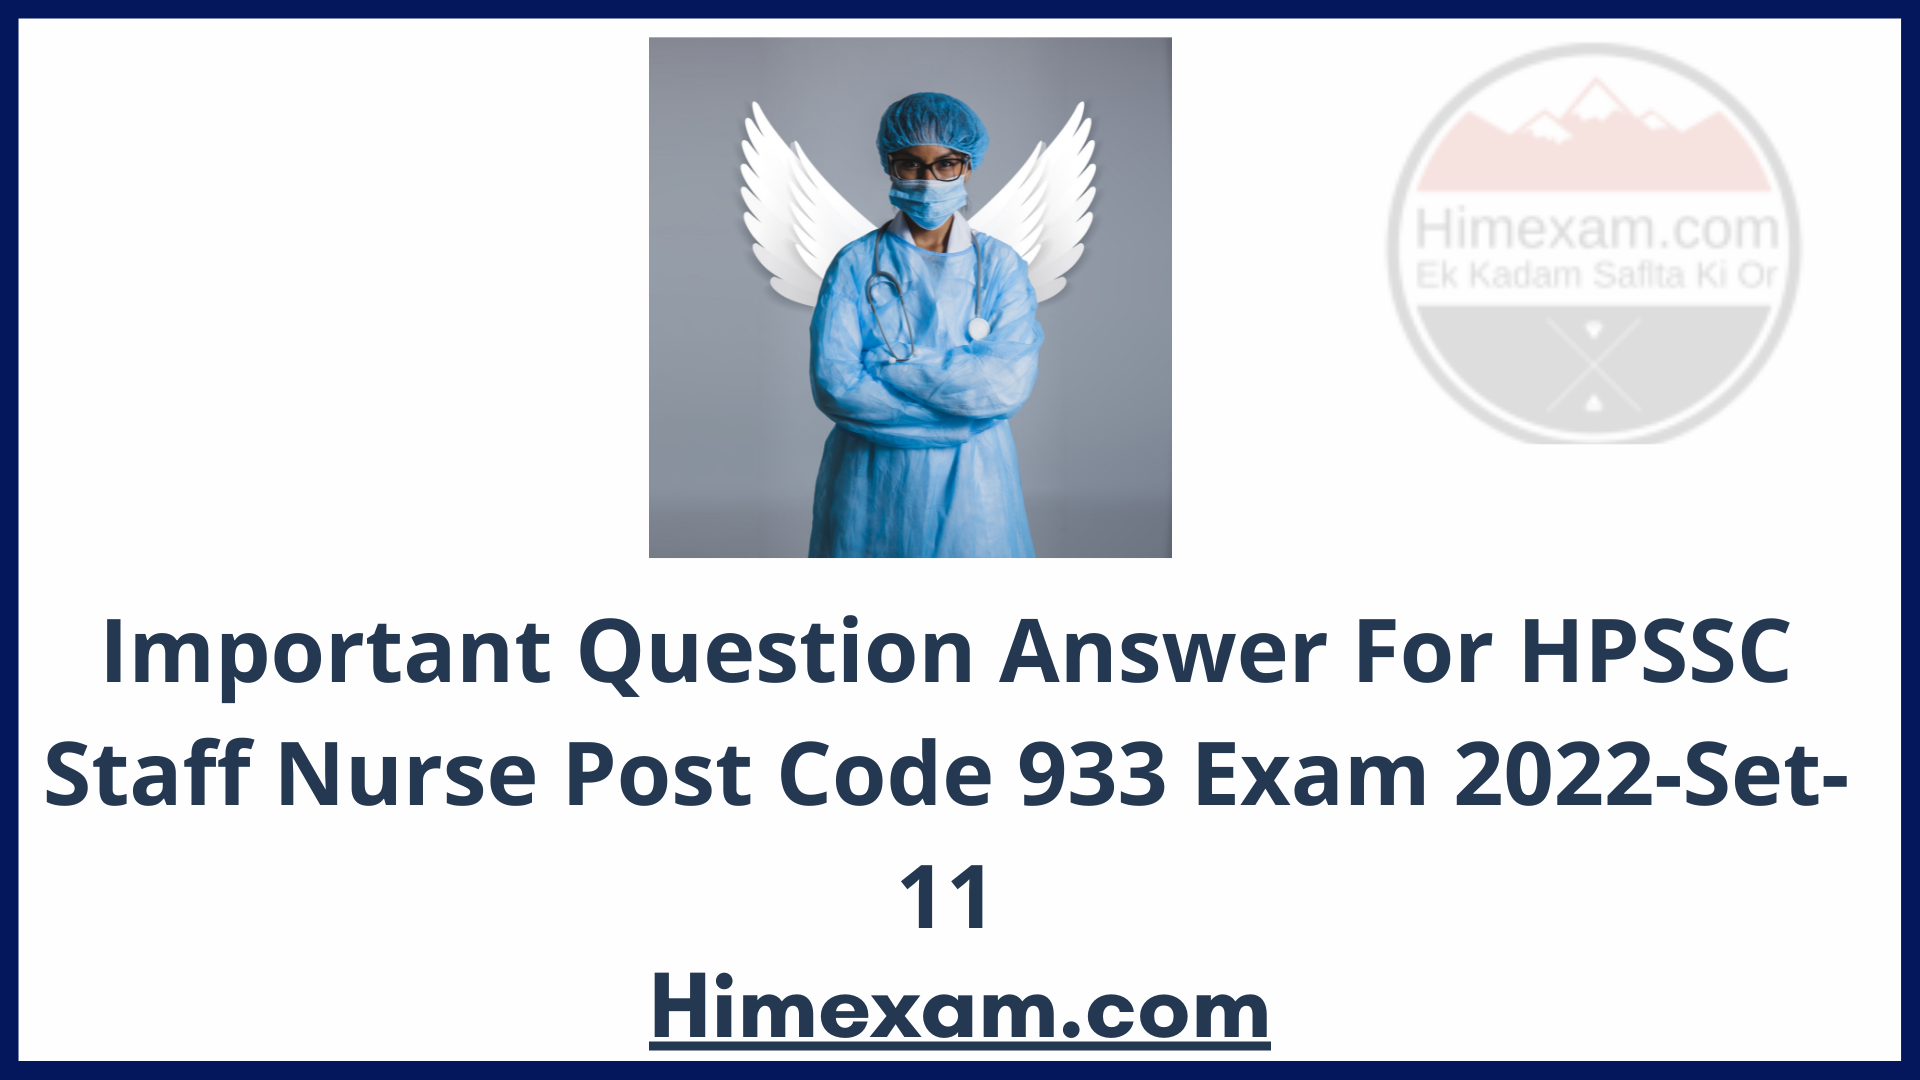 Important Question Answer  For HPSSC Staff Nurse Post Code 933 Exam 2022-Set-11